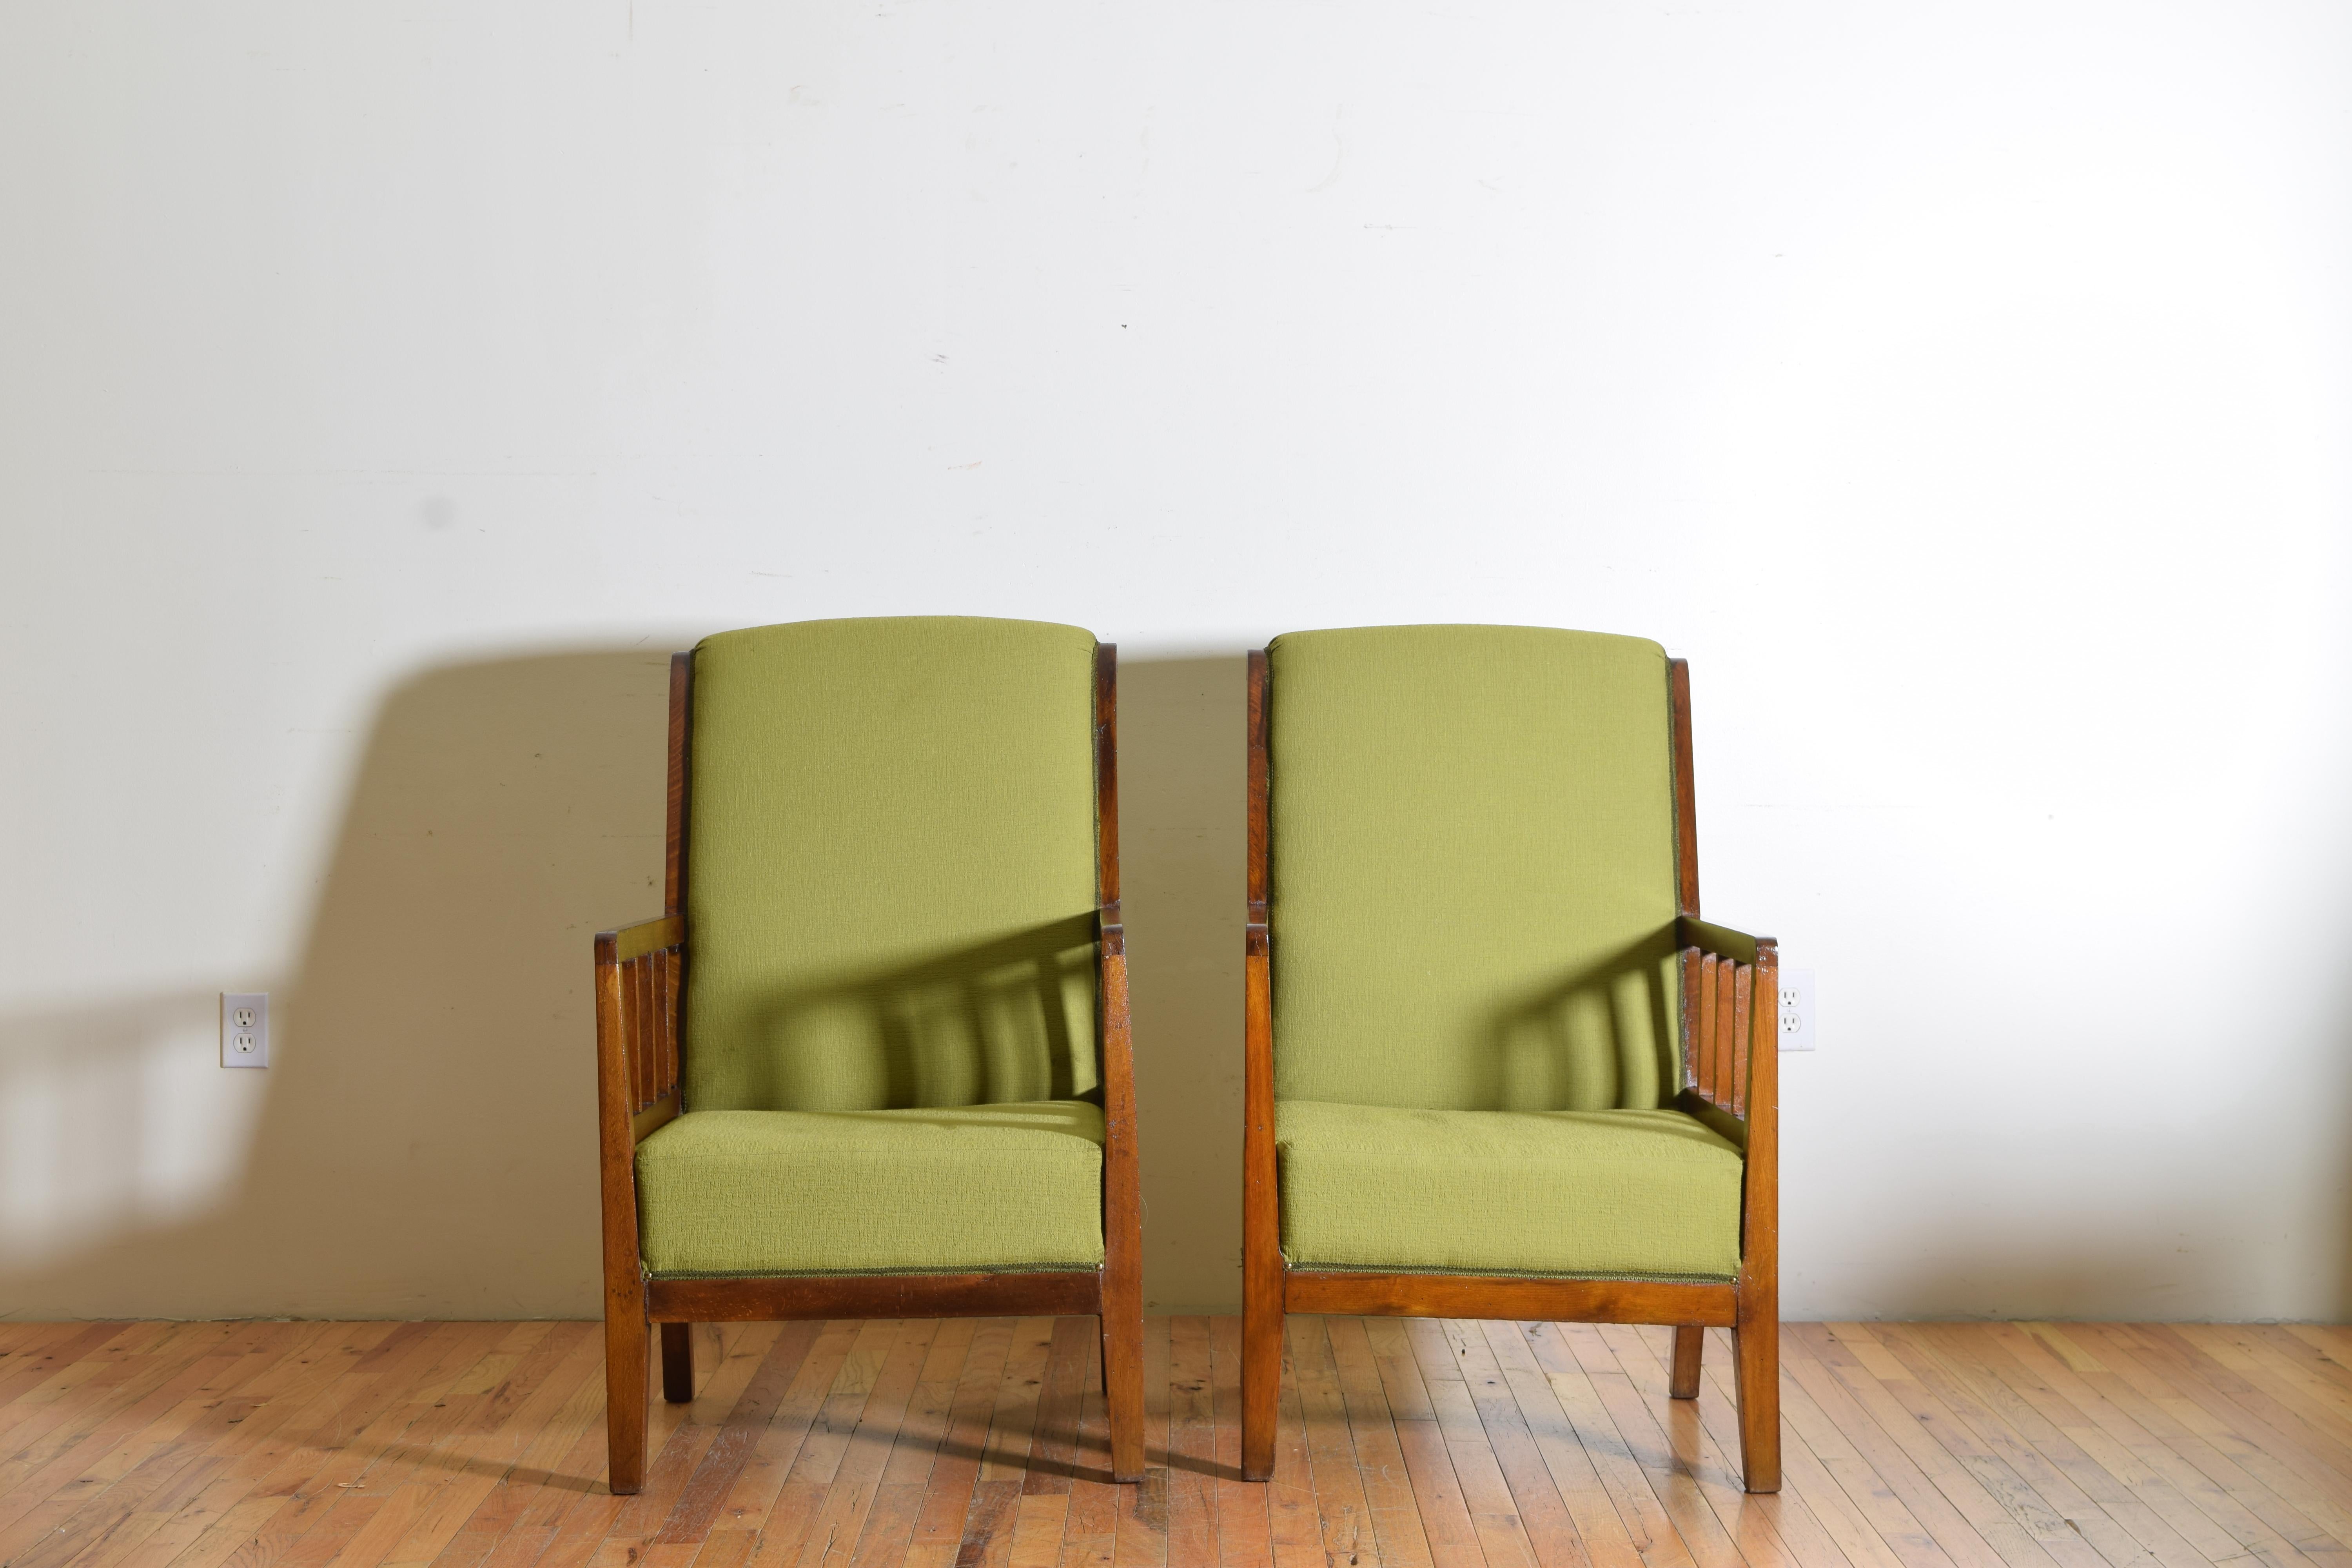 20th Century Pair of Italian Midcentury Wooden and Upholstered Armchairs, circa 1950 For Sale